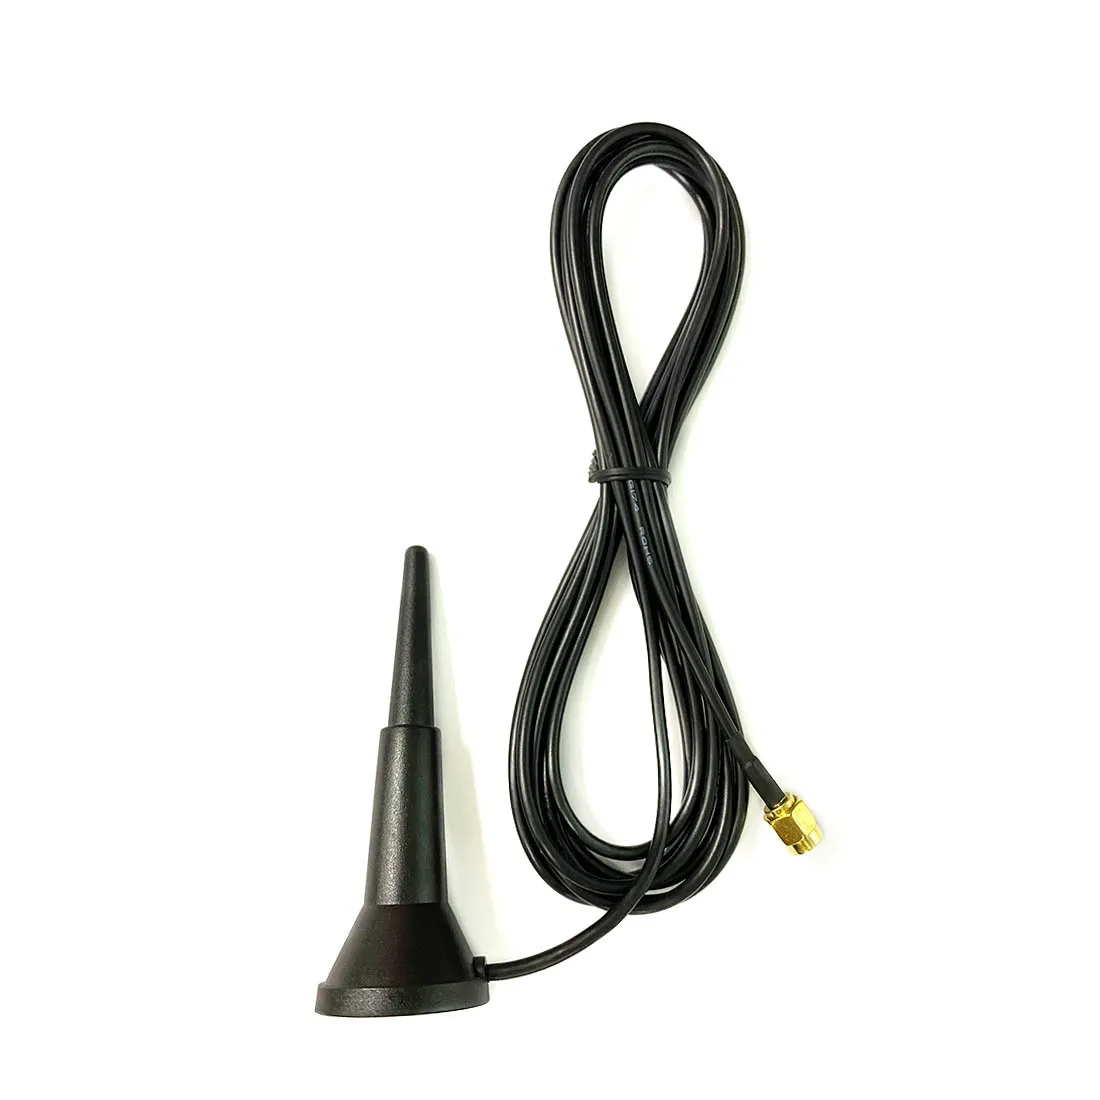 

1PC 2G 3G GPRS GSM Small Sucker Antenna 5dbi OMNI Magnetic base Aerial with 3m cable SMA male Connector outdoor waterproof NEW